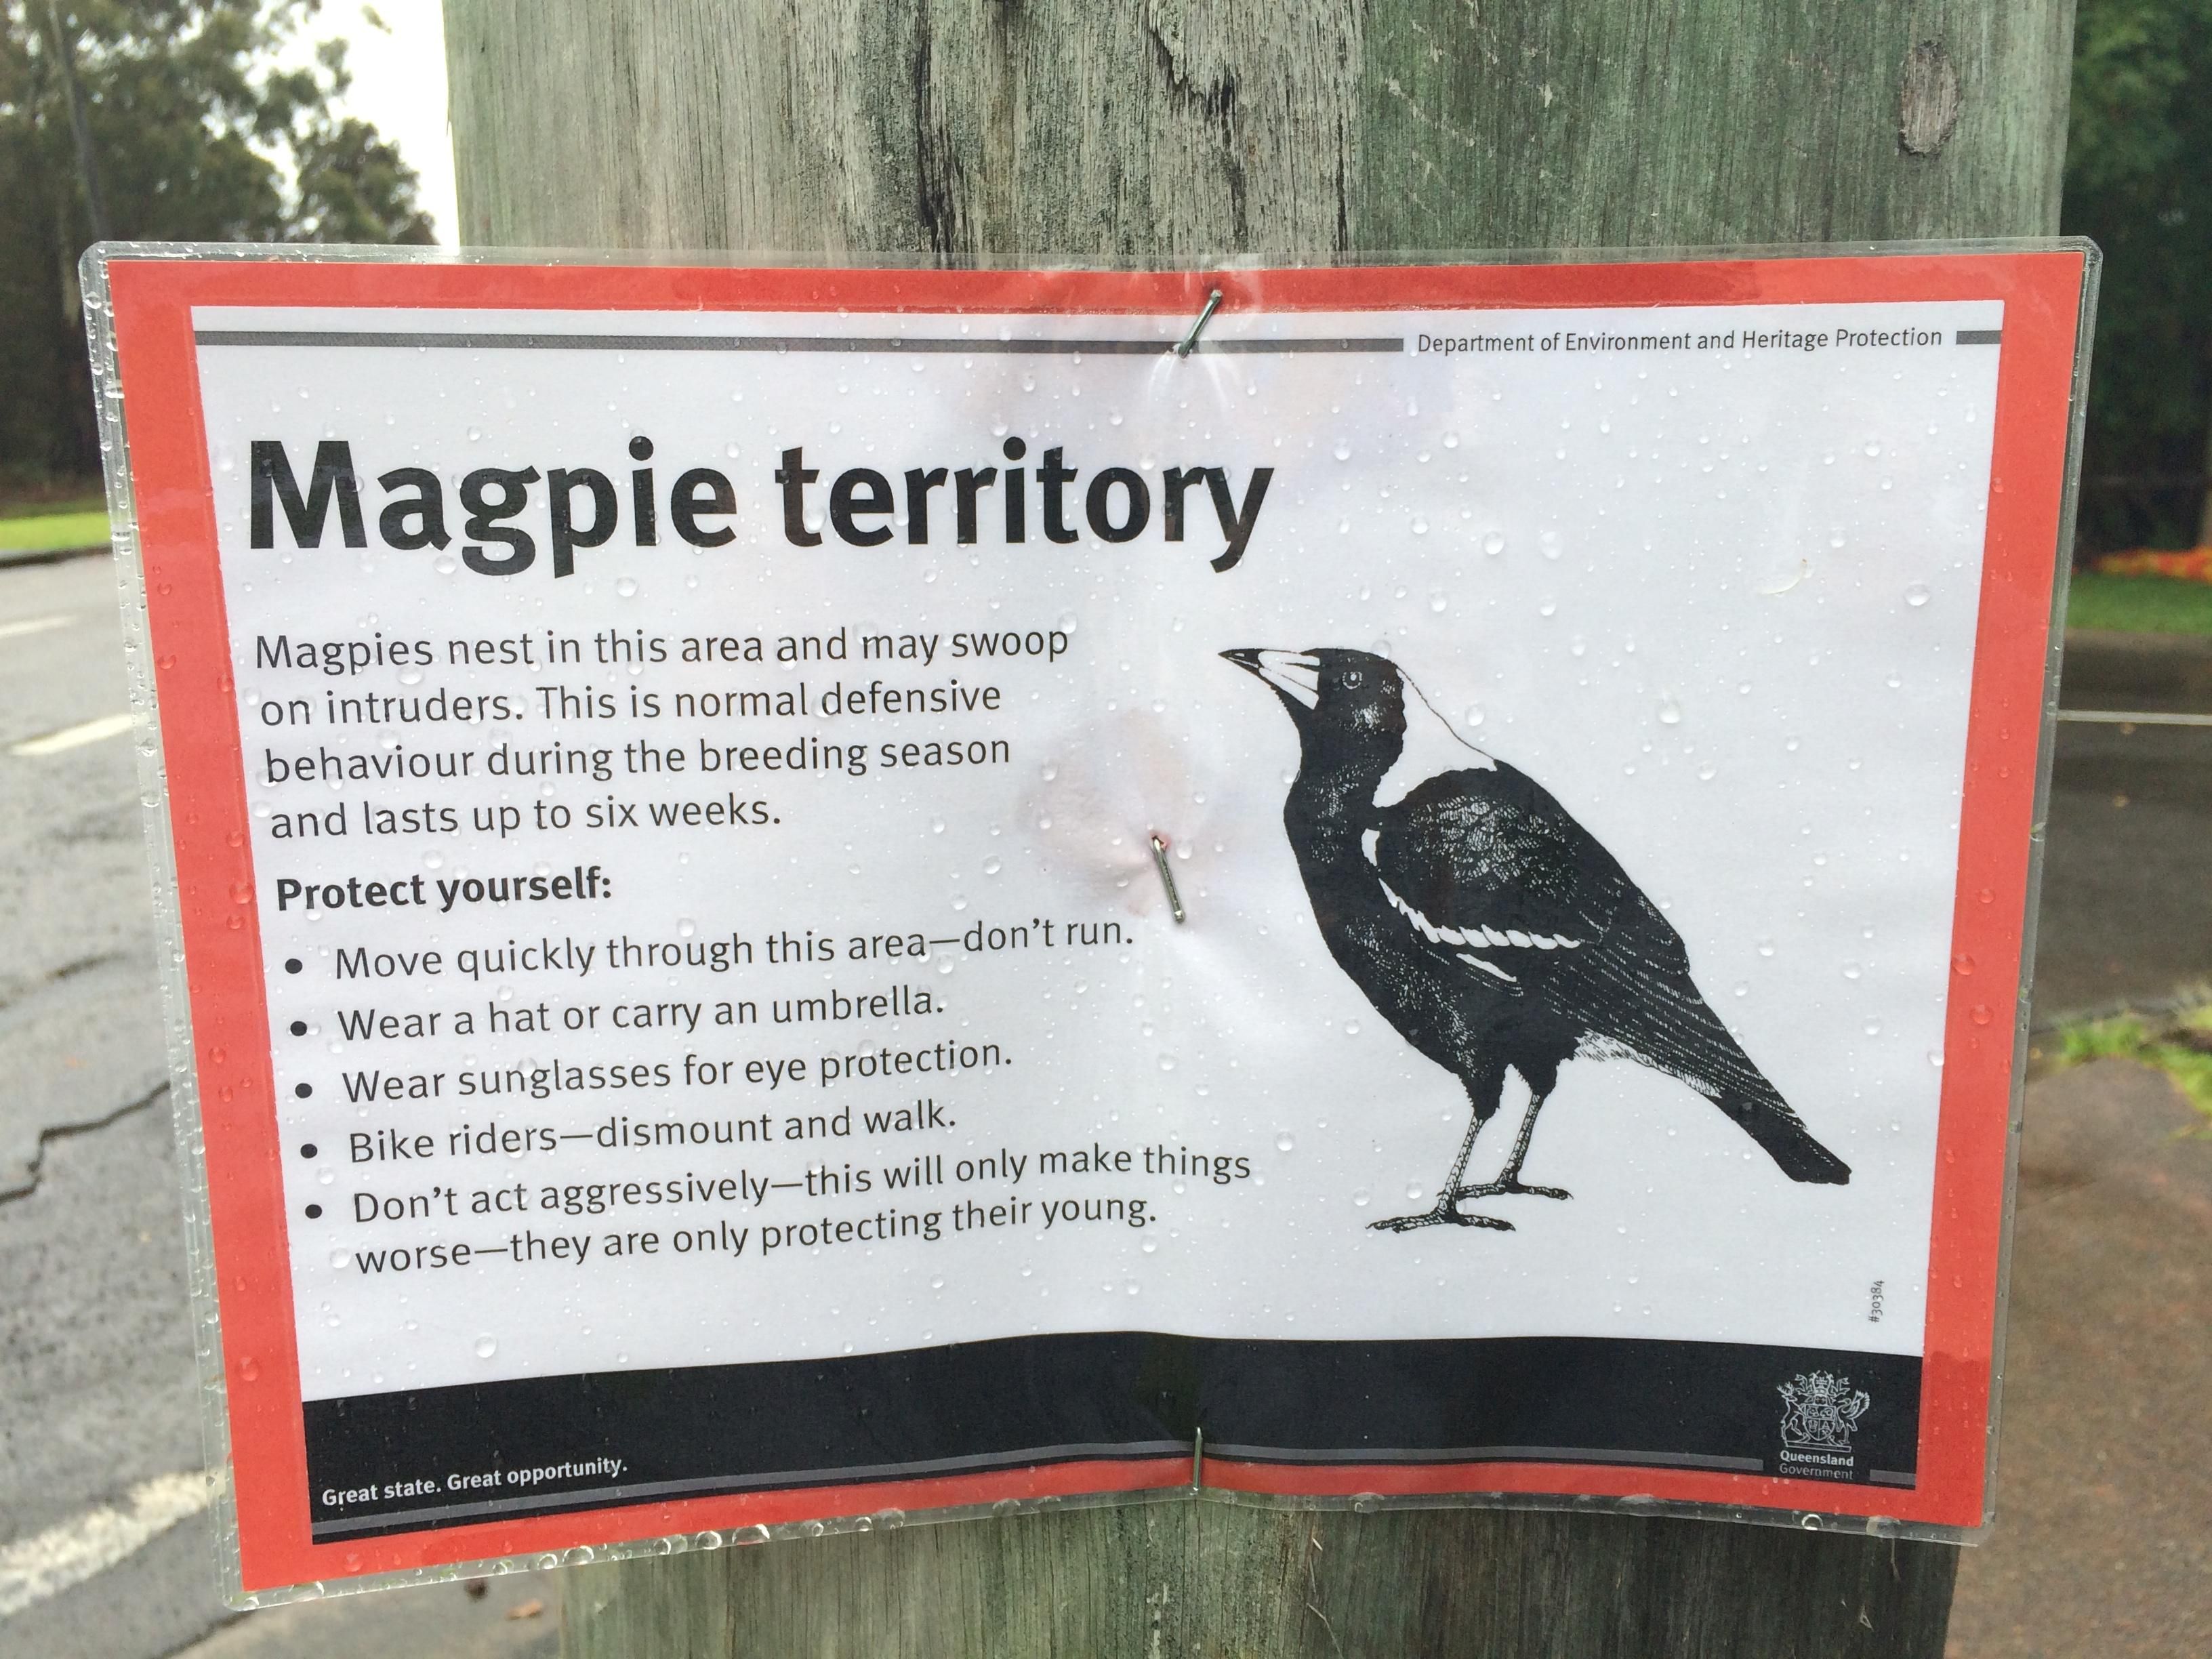 My town has these magpie warnings on every street pole.